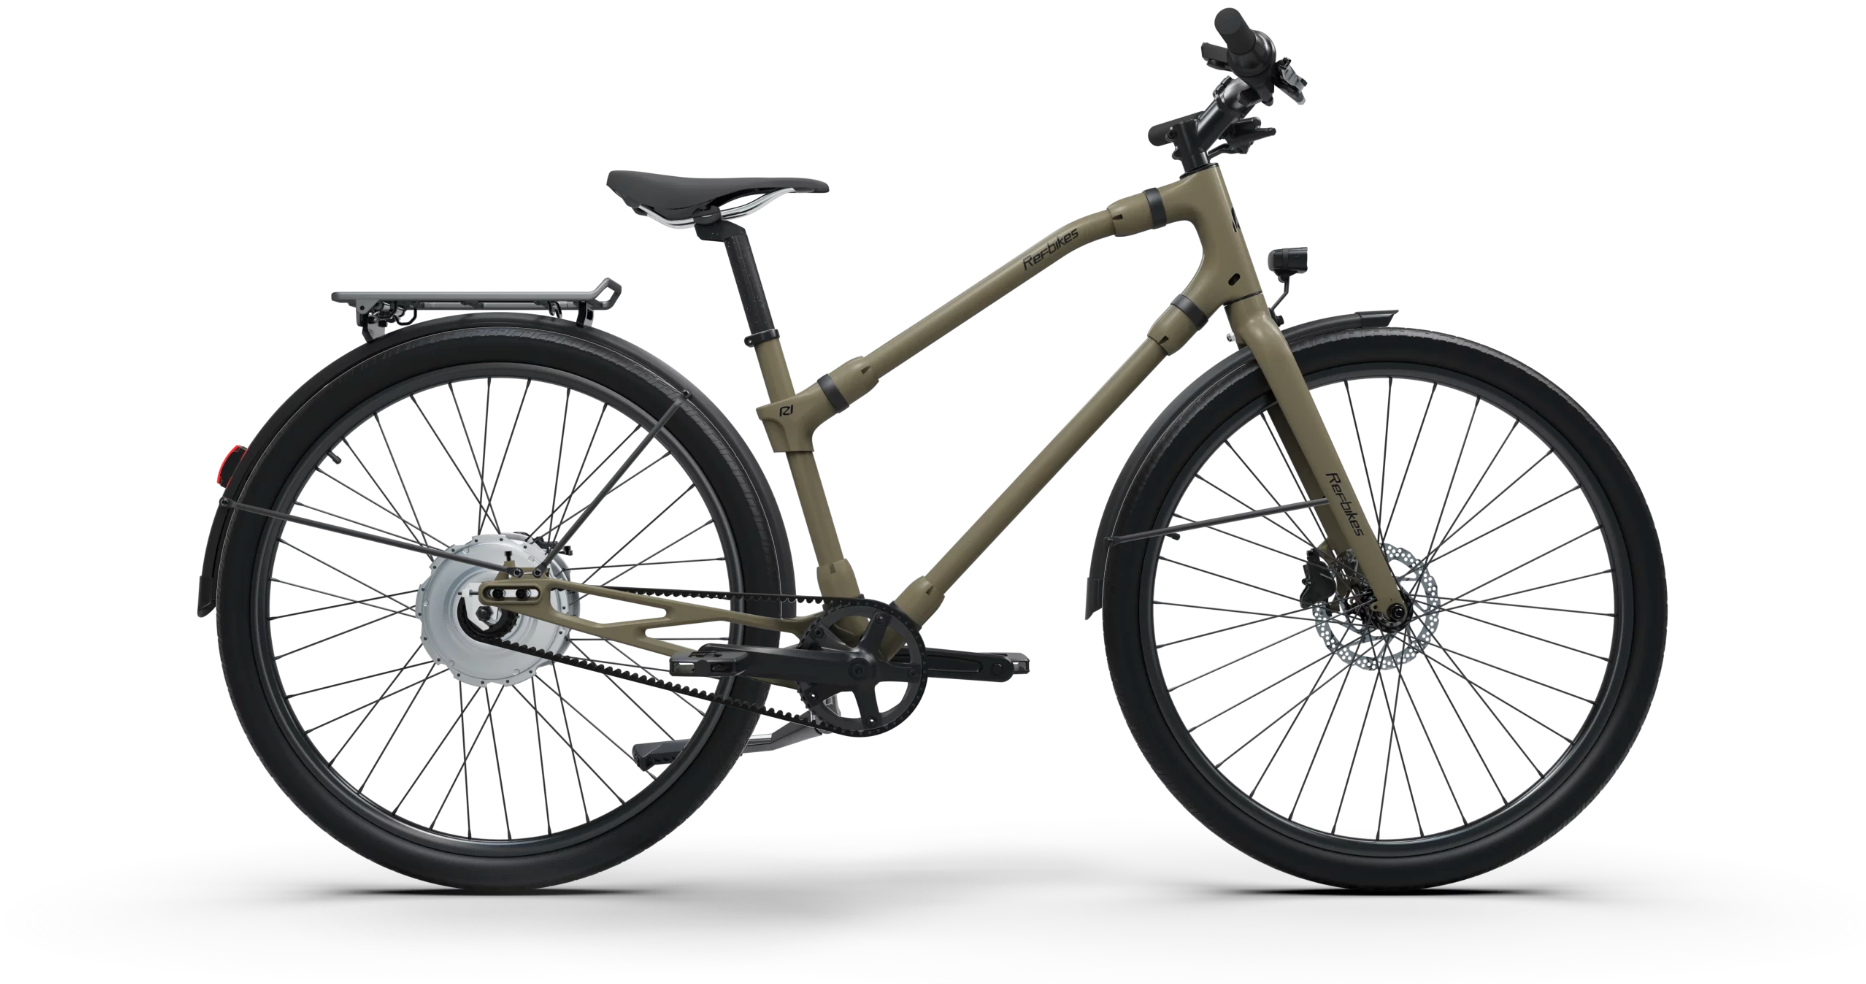 Ref Urban Boost bike in matte sand color with durable tires and modern electric motor design.